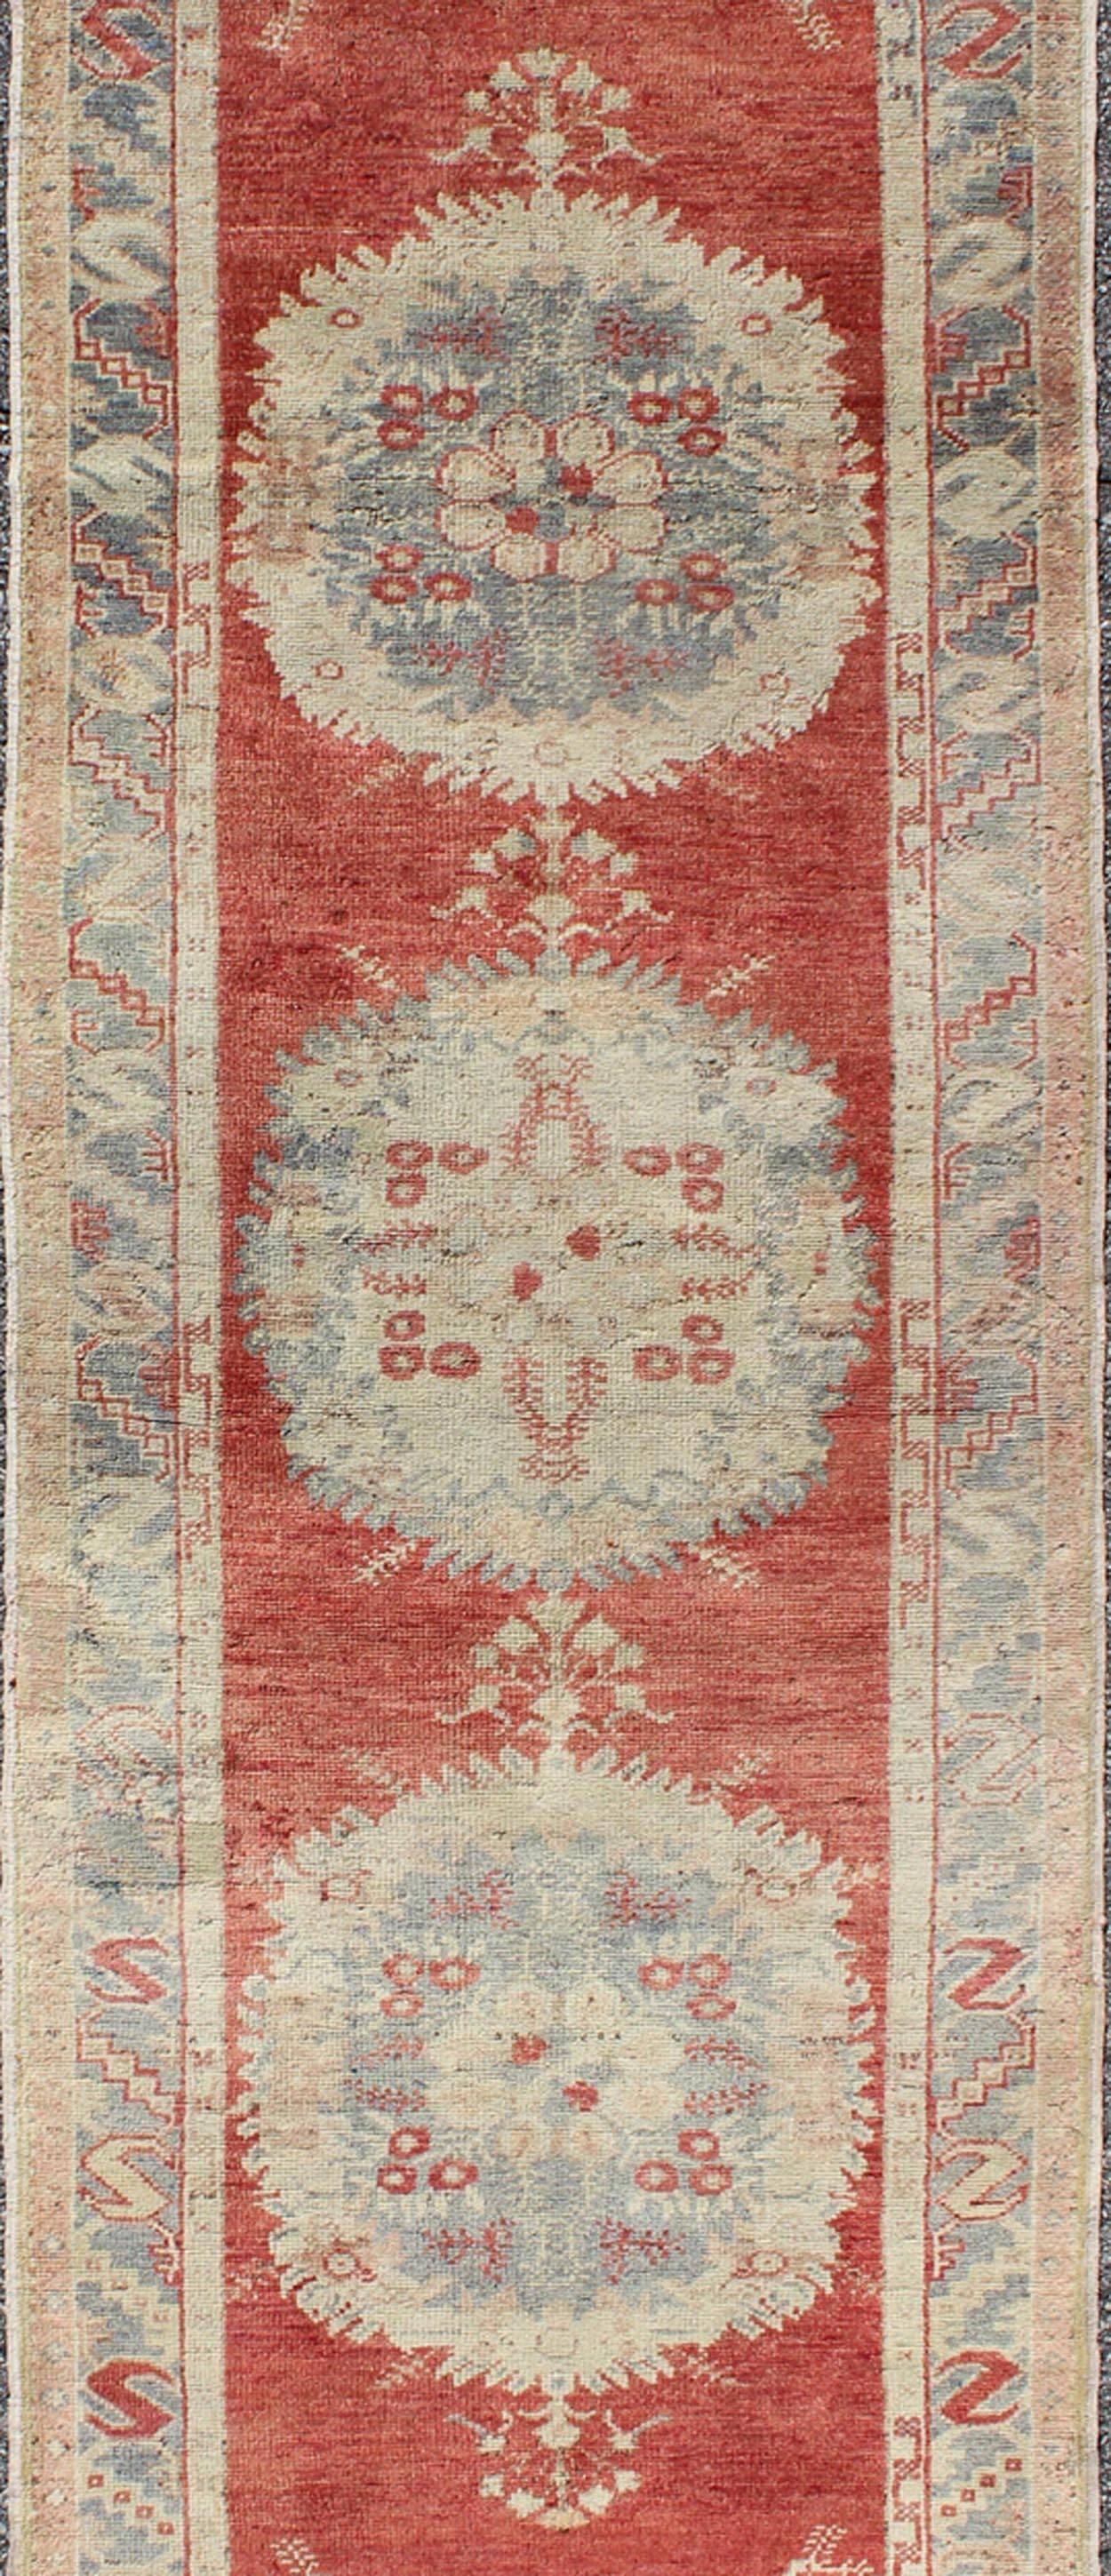 Hand-Knotted Vintage Turkish Oushak Runner with Three Floral Medallions in Red, Ivory, Grey